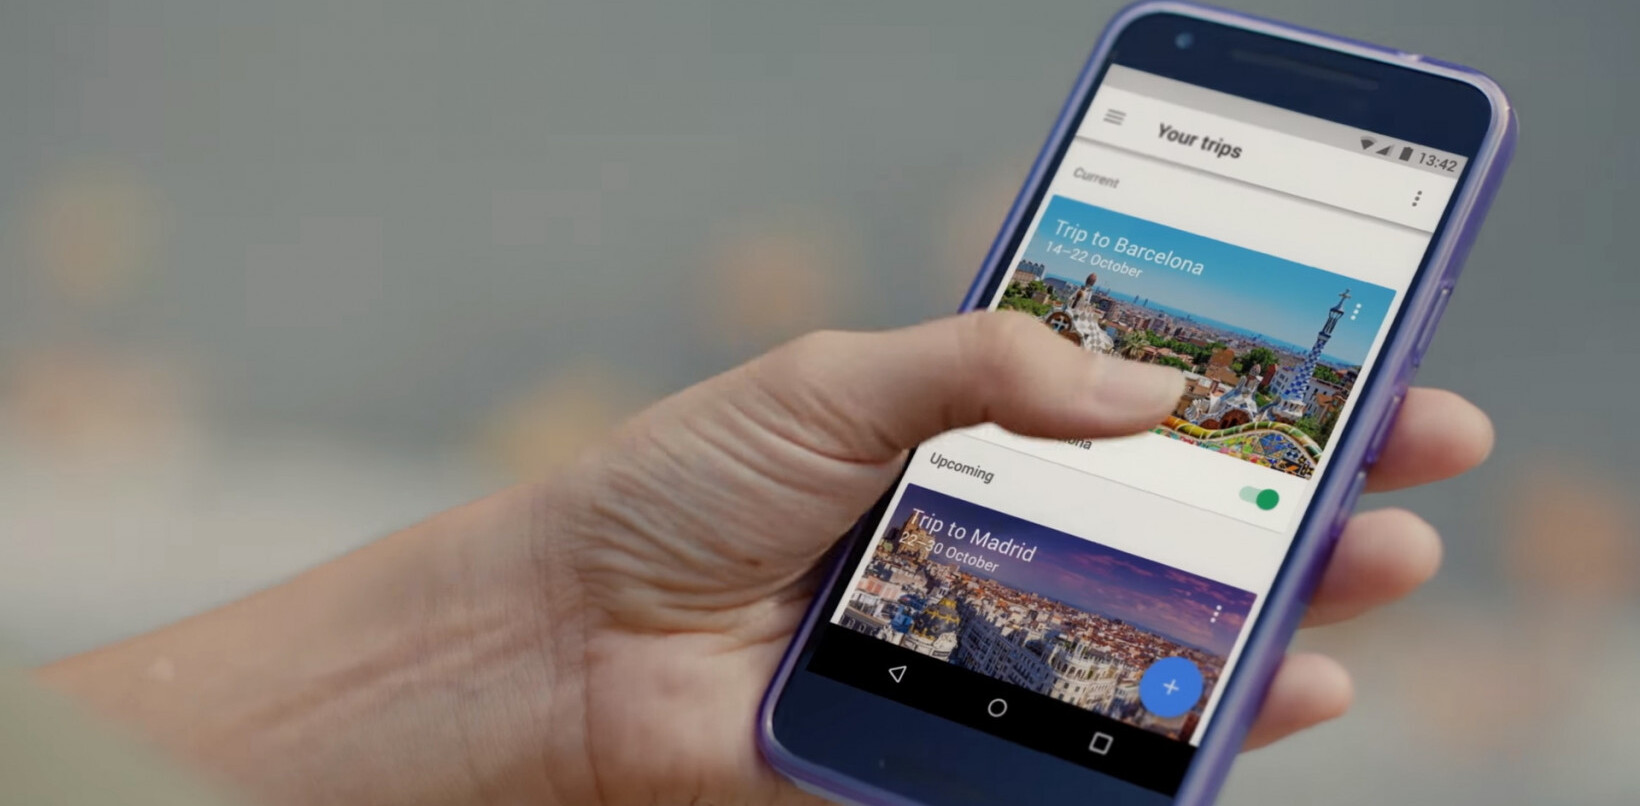 It’s the end of the road for Google’s excellent Trips mobile app